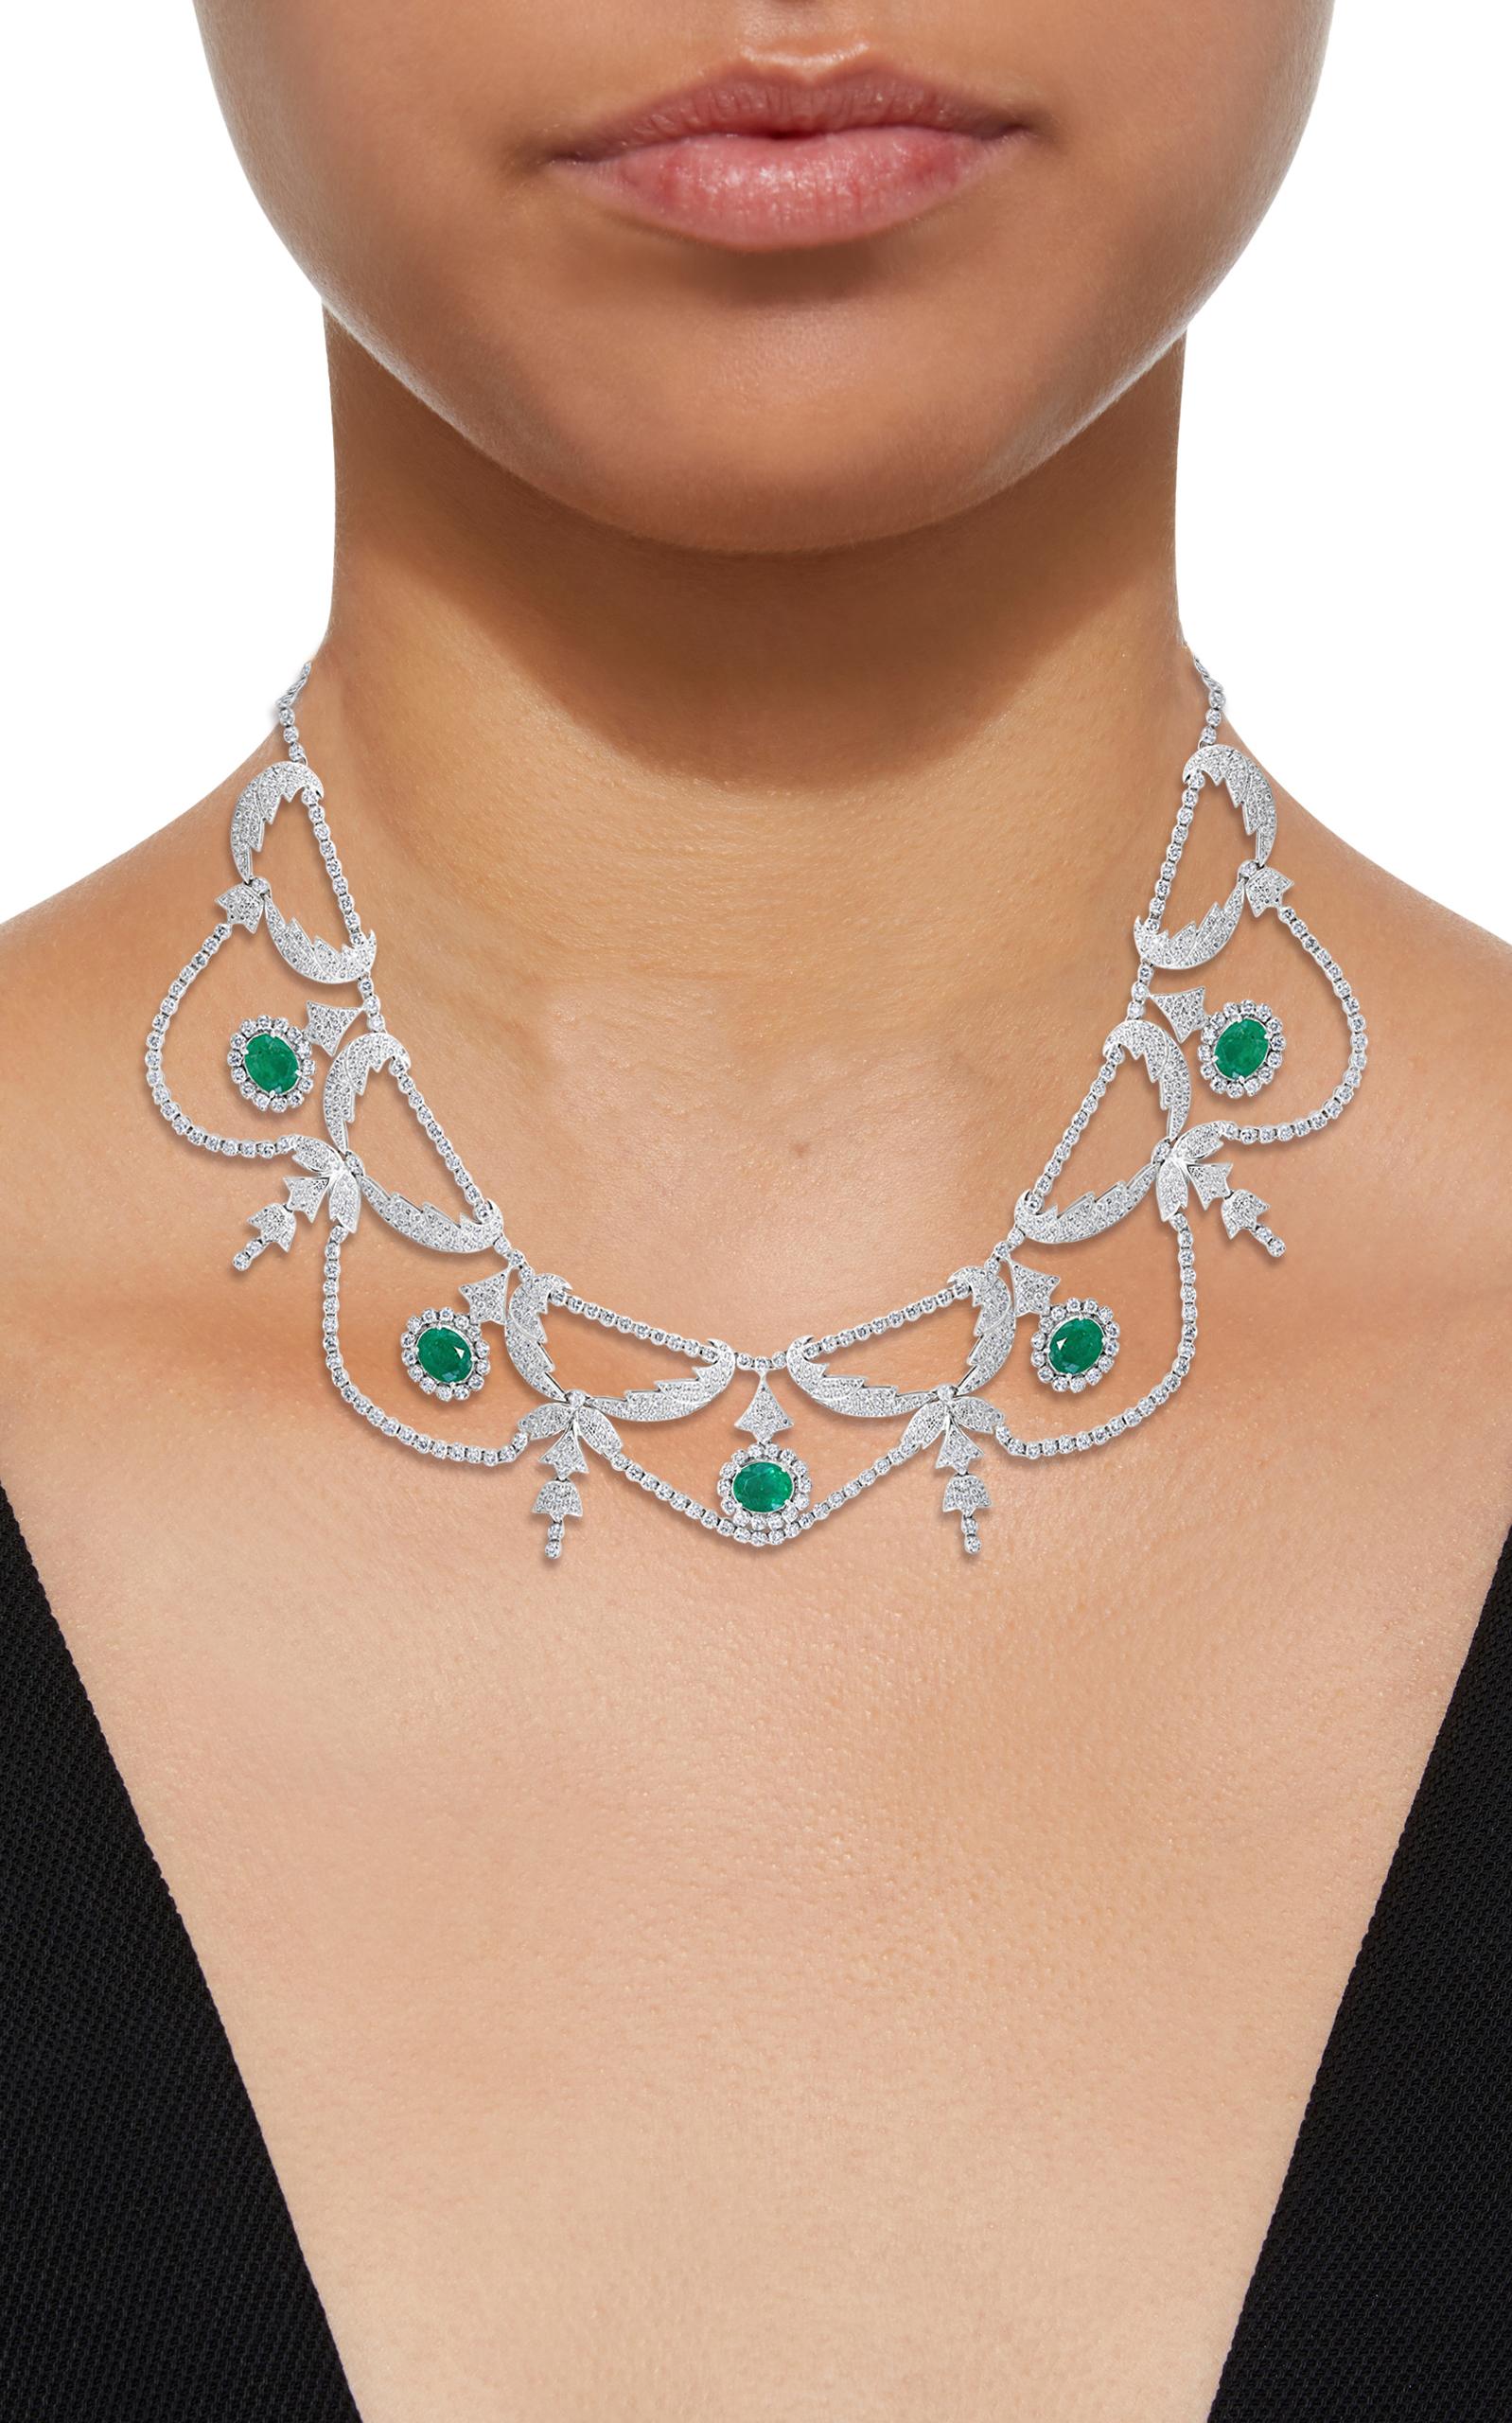 Oval Natural Zambian Emerald & Diamond Fringe Necklace and Earring Bridal Suite For Sale 8